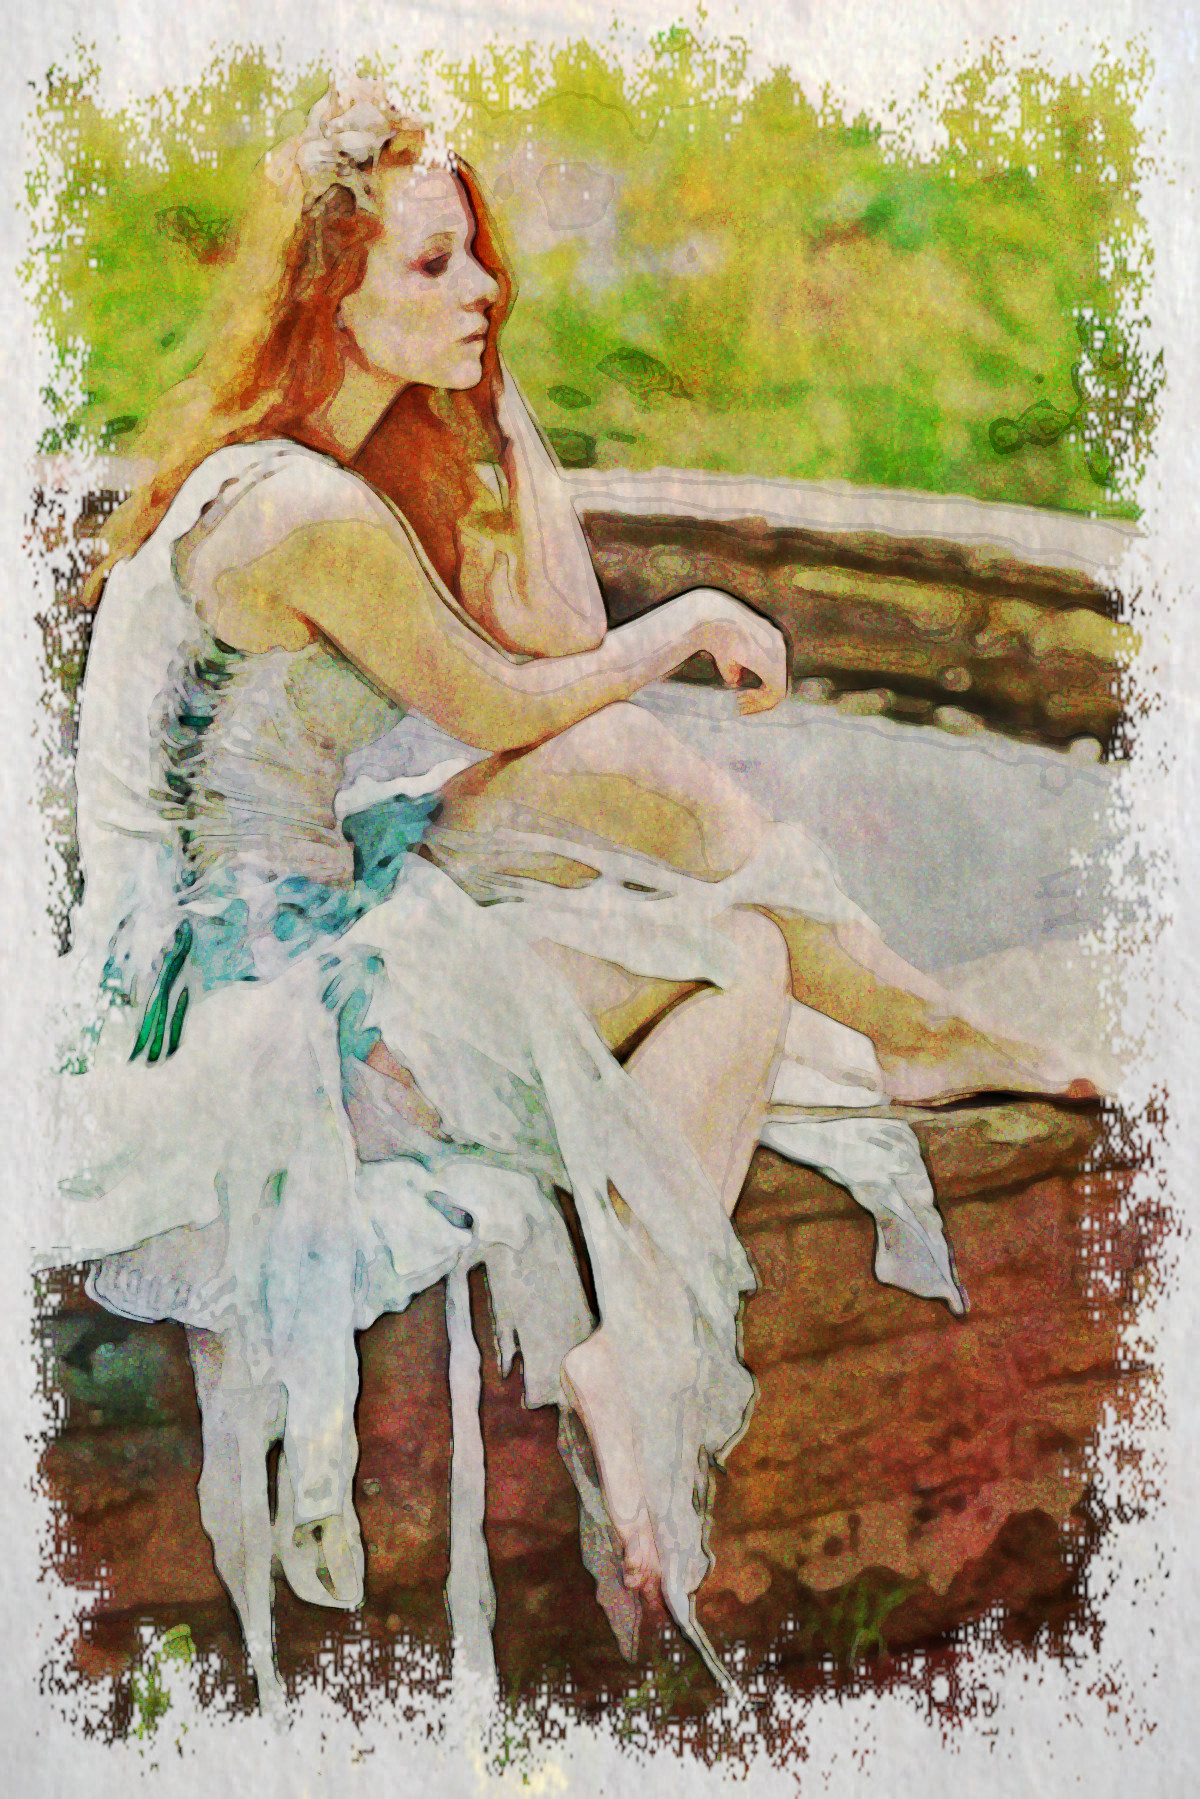 2022-05-12 06-48-09 nymph_05_by_fuchsfee_stock_d7pl4dn with JVID effect LA (Watercolour Graphic Effect, aged).jpeg